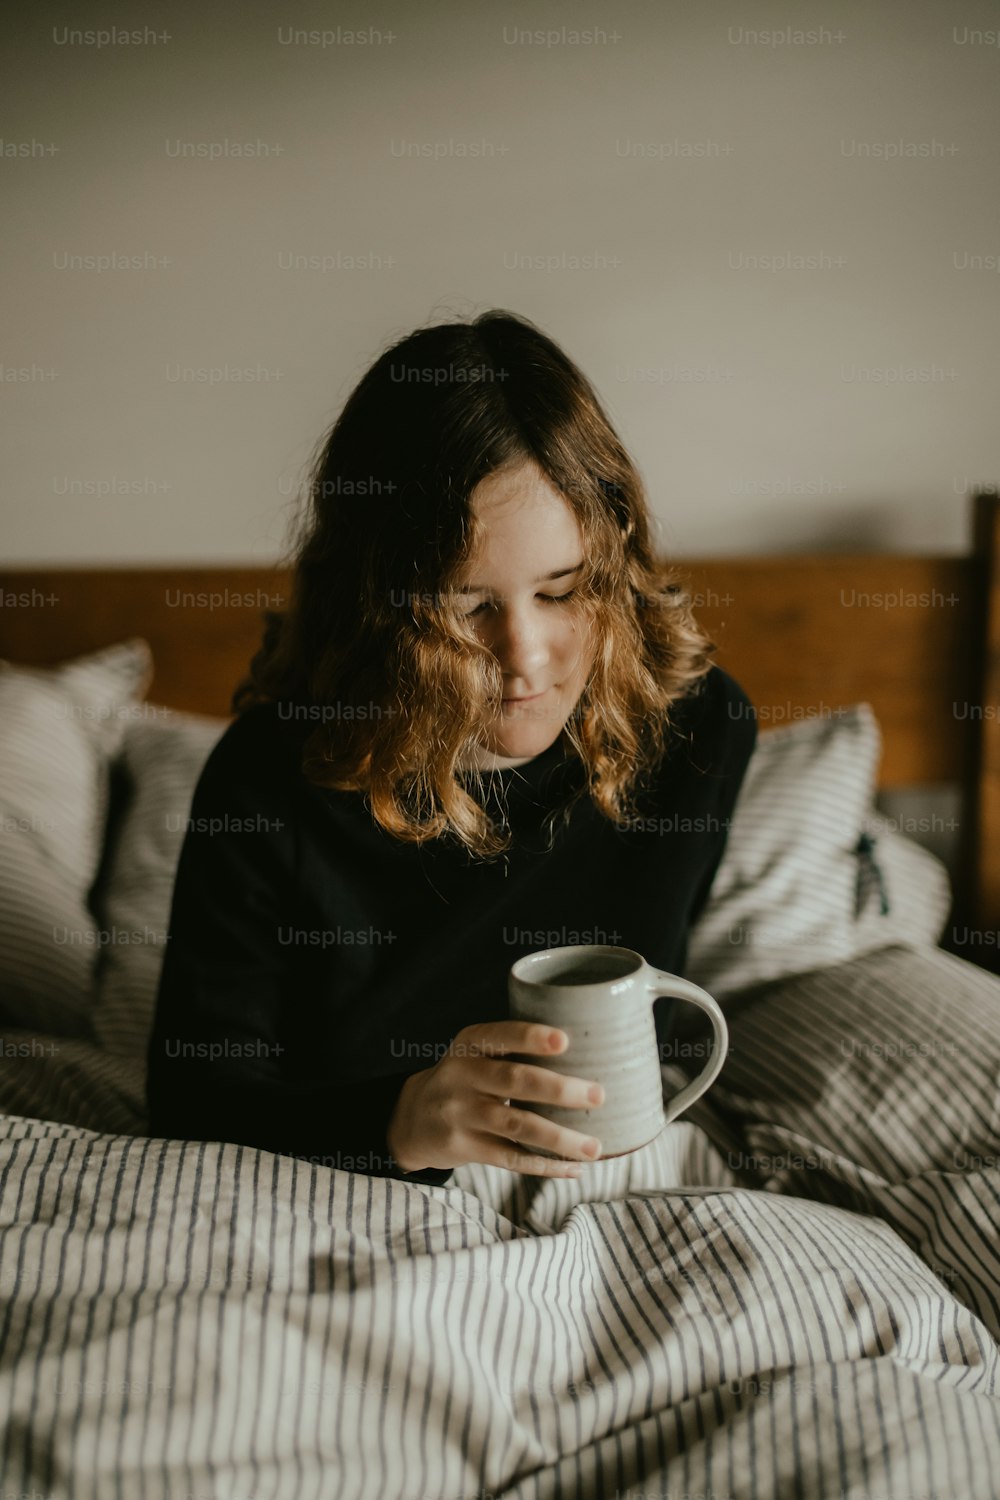 a person sitting on a couch holding a coffee cup